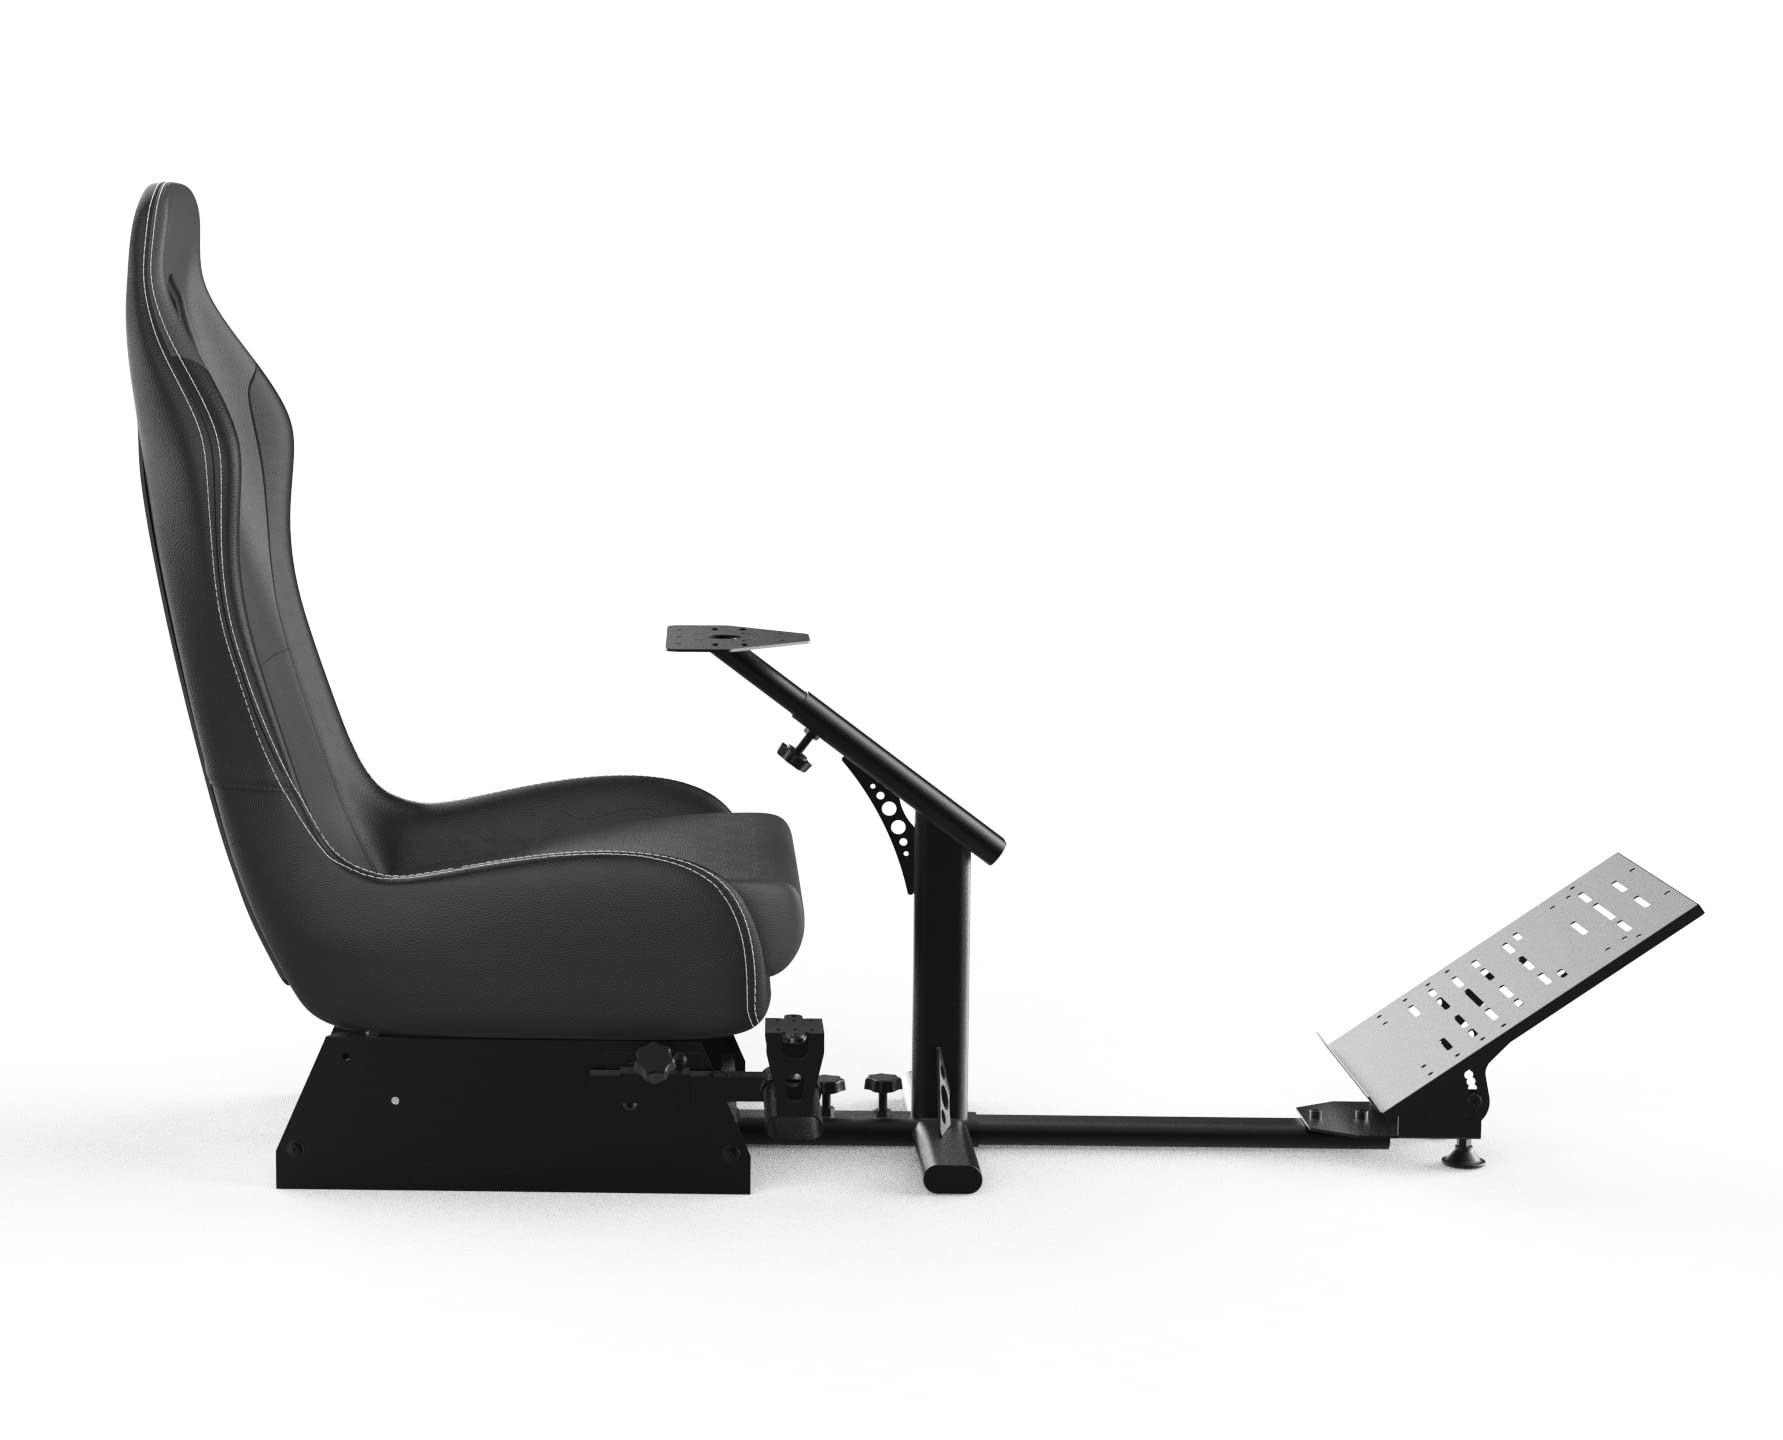 cirearoa Racing Wheel Stand with seat gaming chair driving Cockpit for All Logitech G923 | G29 | G920 | Thrustmaster | Fanatec Wheels | Xbox One, PS4, PC Platforms (Black/Grey)